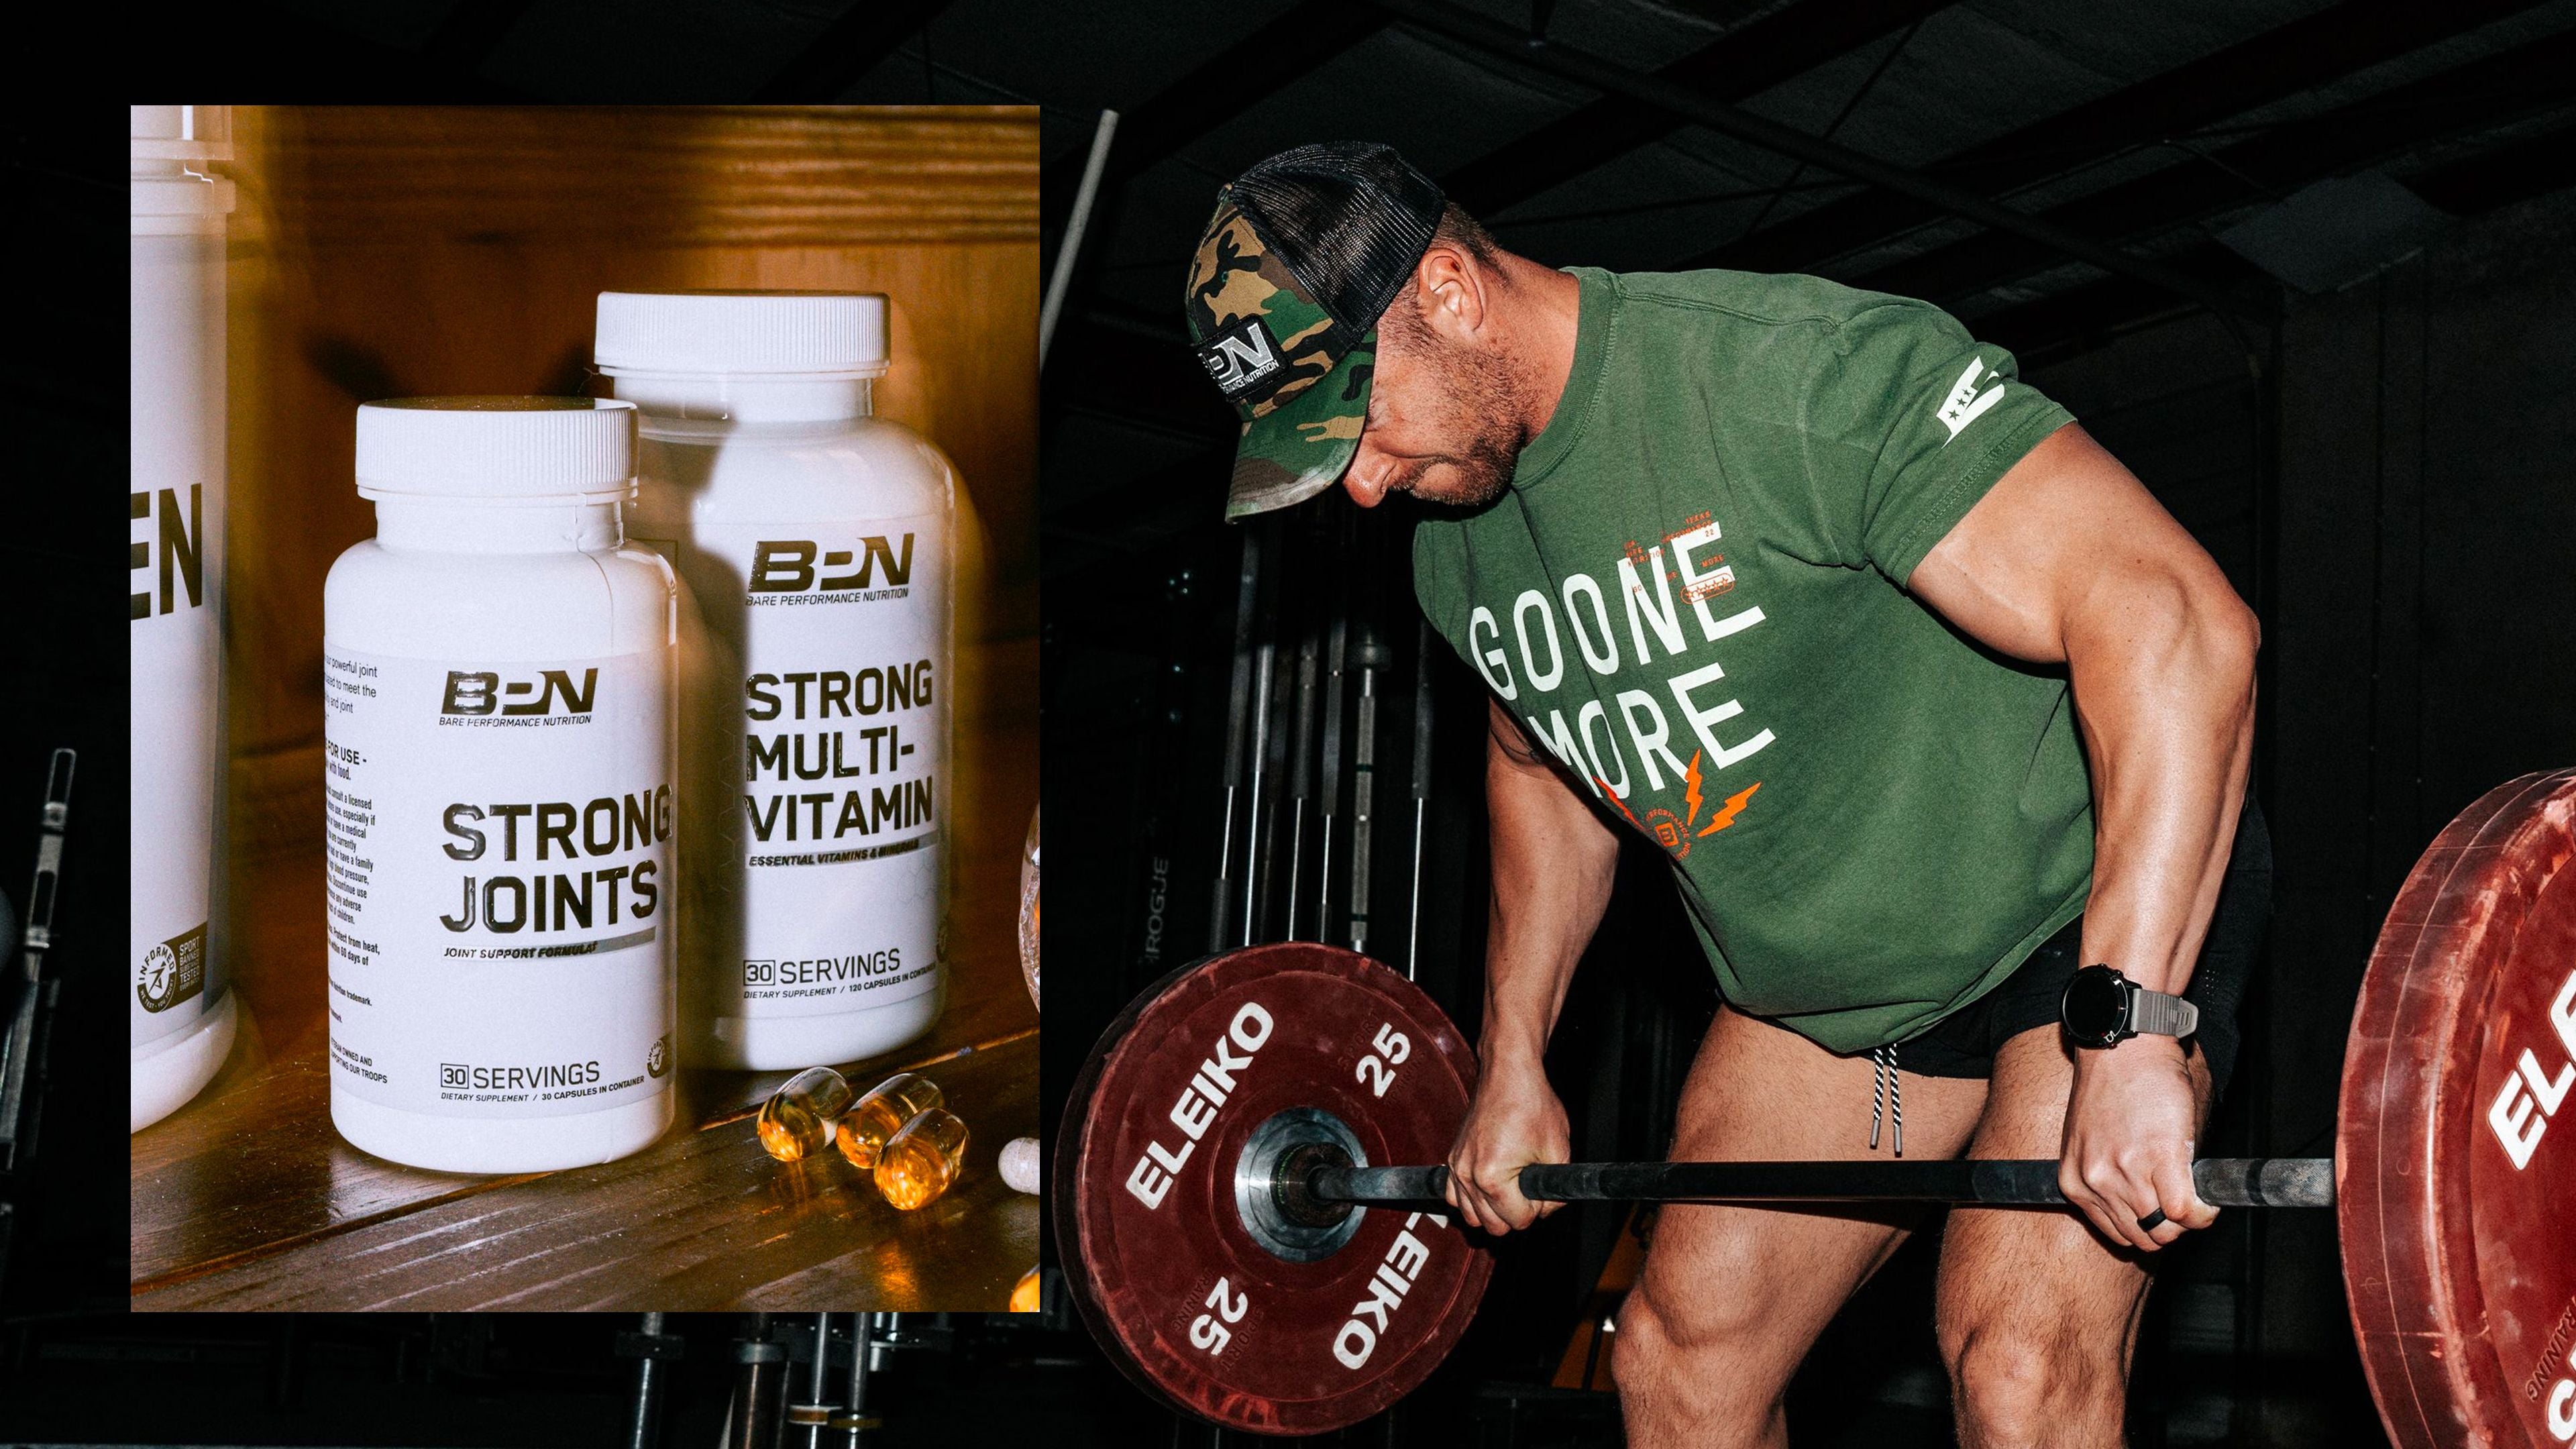 About Nick Bare - Founder of Bare Performance Nutrition